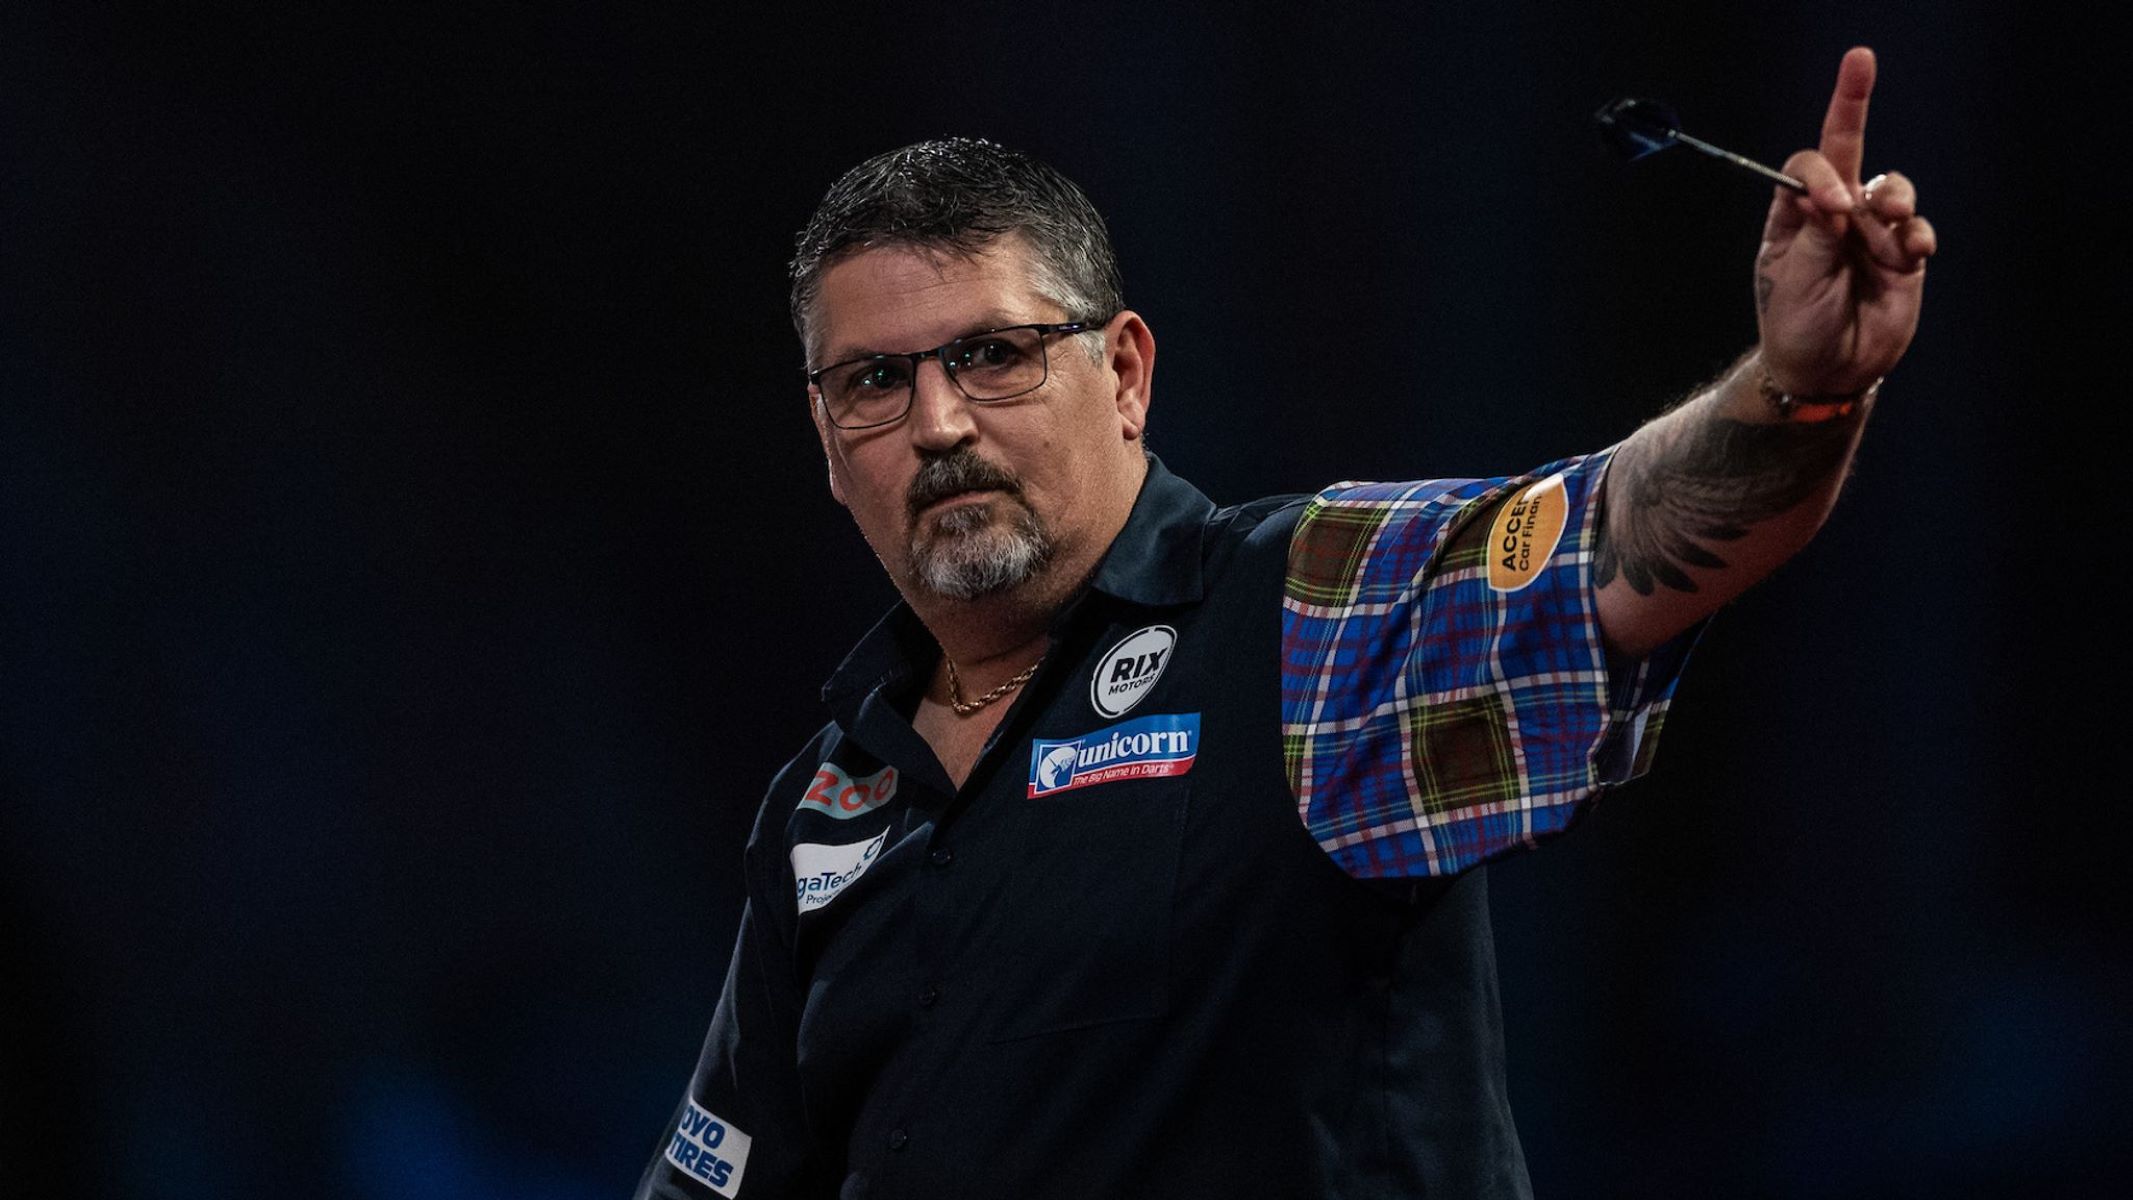 25-astonishing-facts-about-gary-anderson